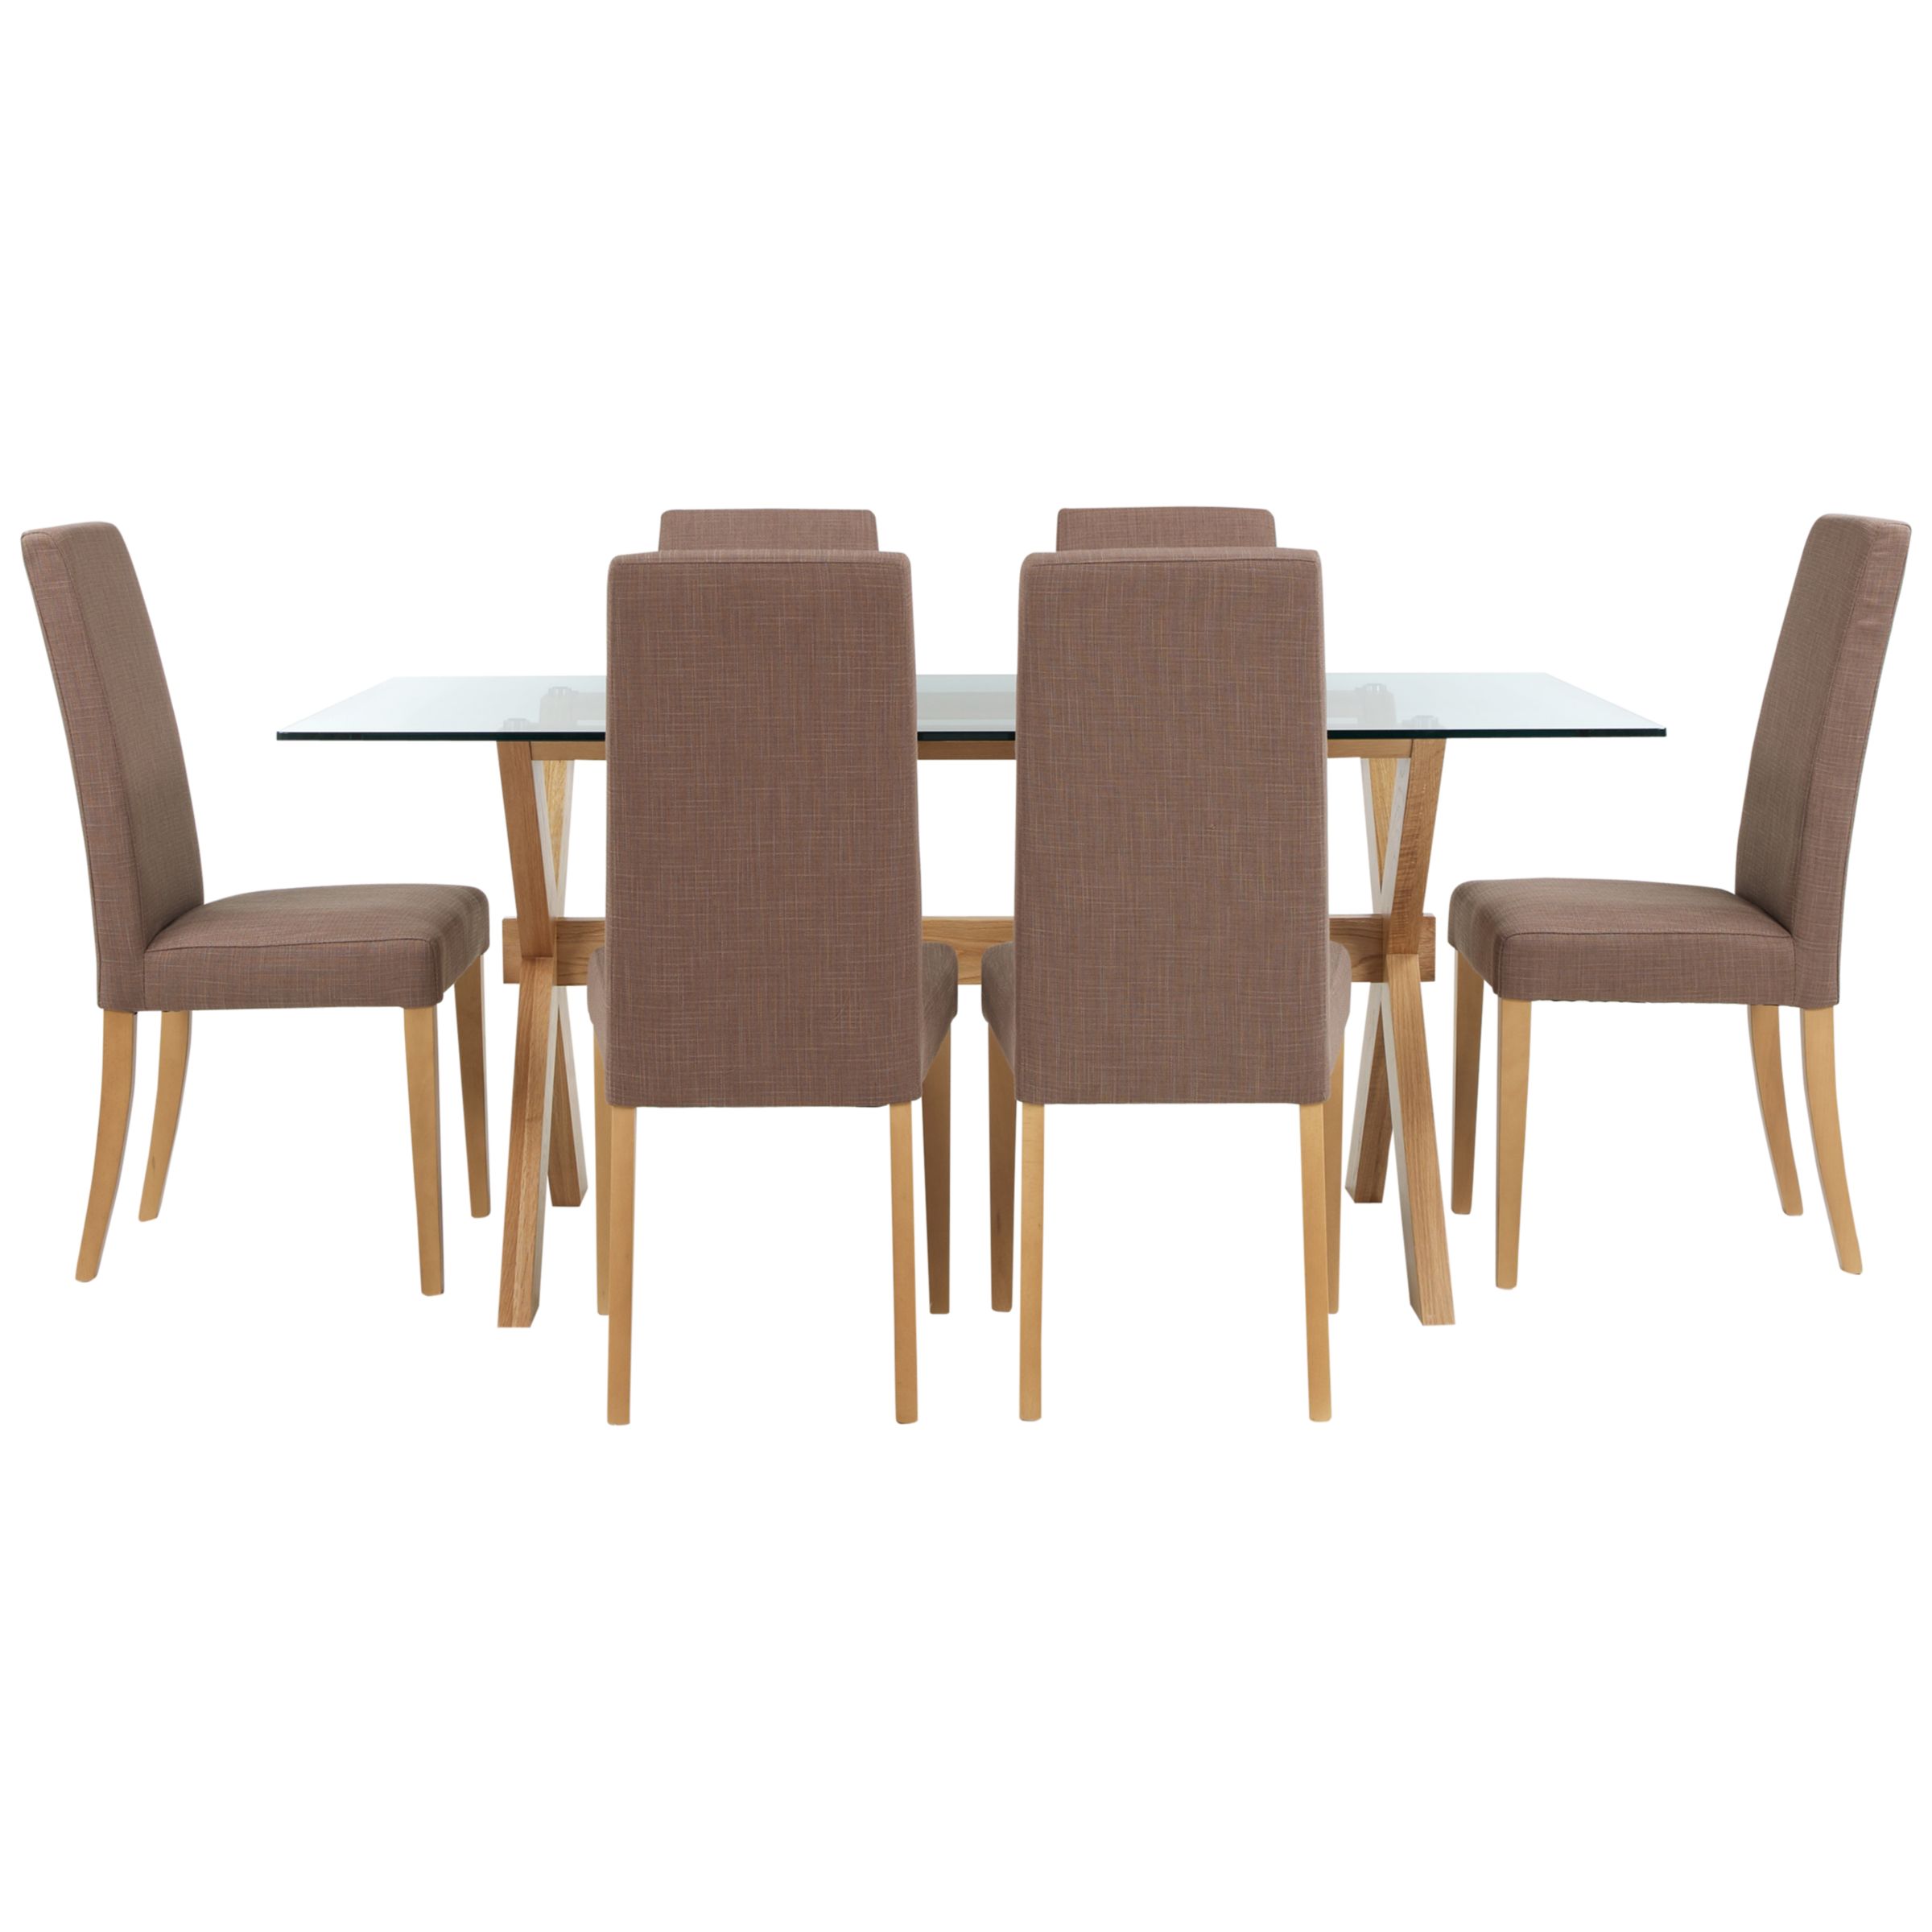 John Lewis Gene Dining Table and 6 Lydia Chairs in Mocha, width 170cm